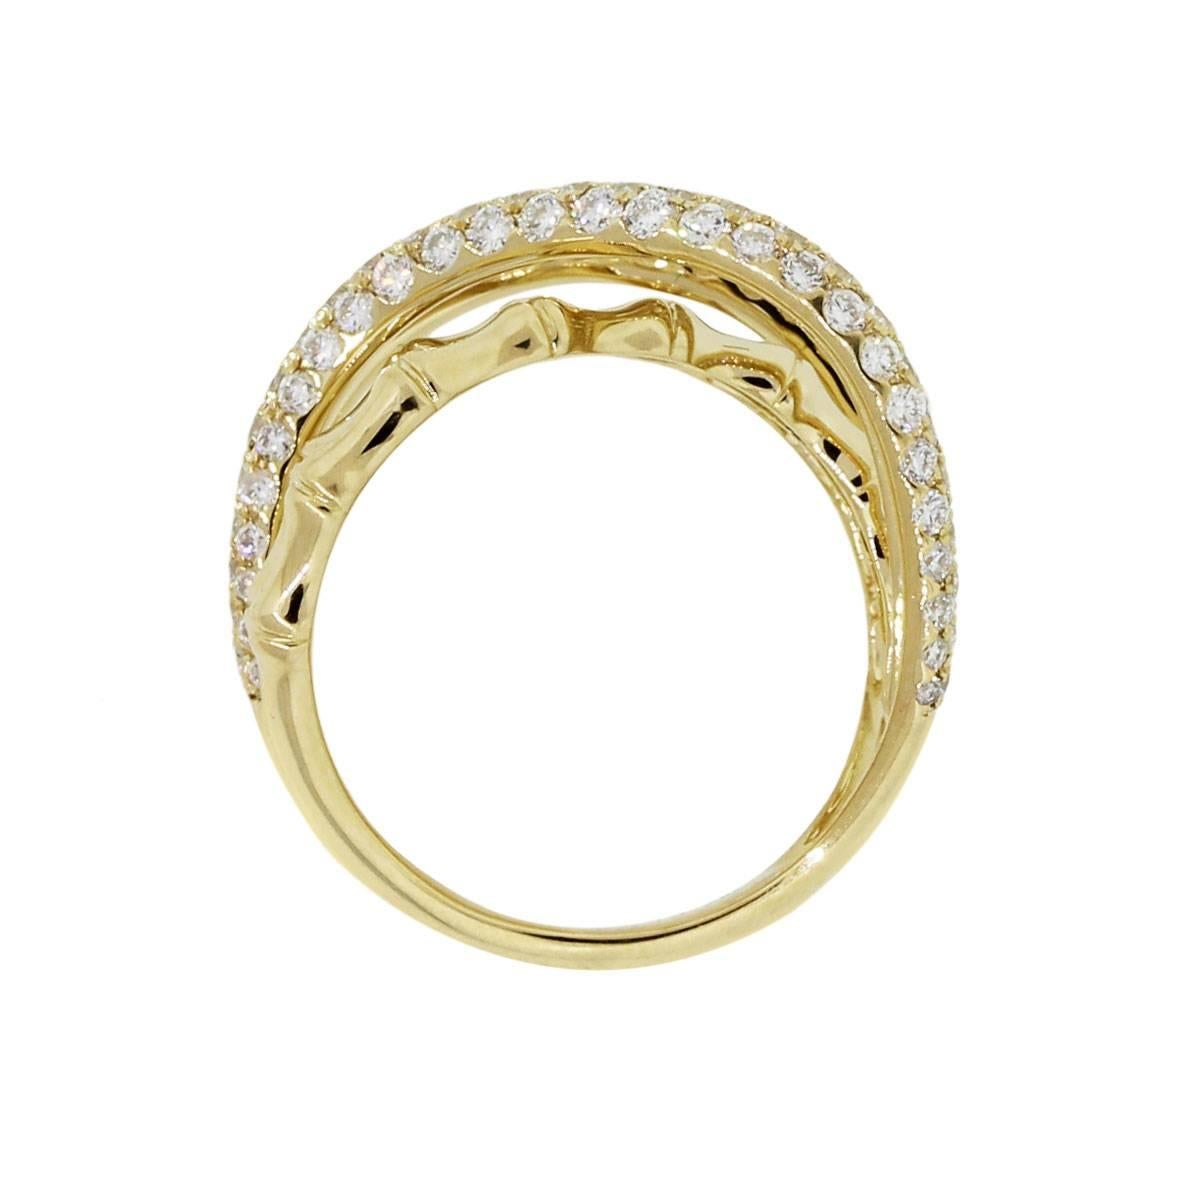 Material: 18k yellow gold
Diamond Details: Approximately 1.44ctw of round brilliant. Diamonds are H/I in color and SI in clarity
Size: 7
Total Weight: 7.5g (4.8dwt)
Measurements: 0.96″ x 0.49″ x 0.86″
Additional Details: This item comes with a